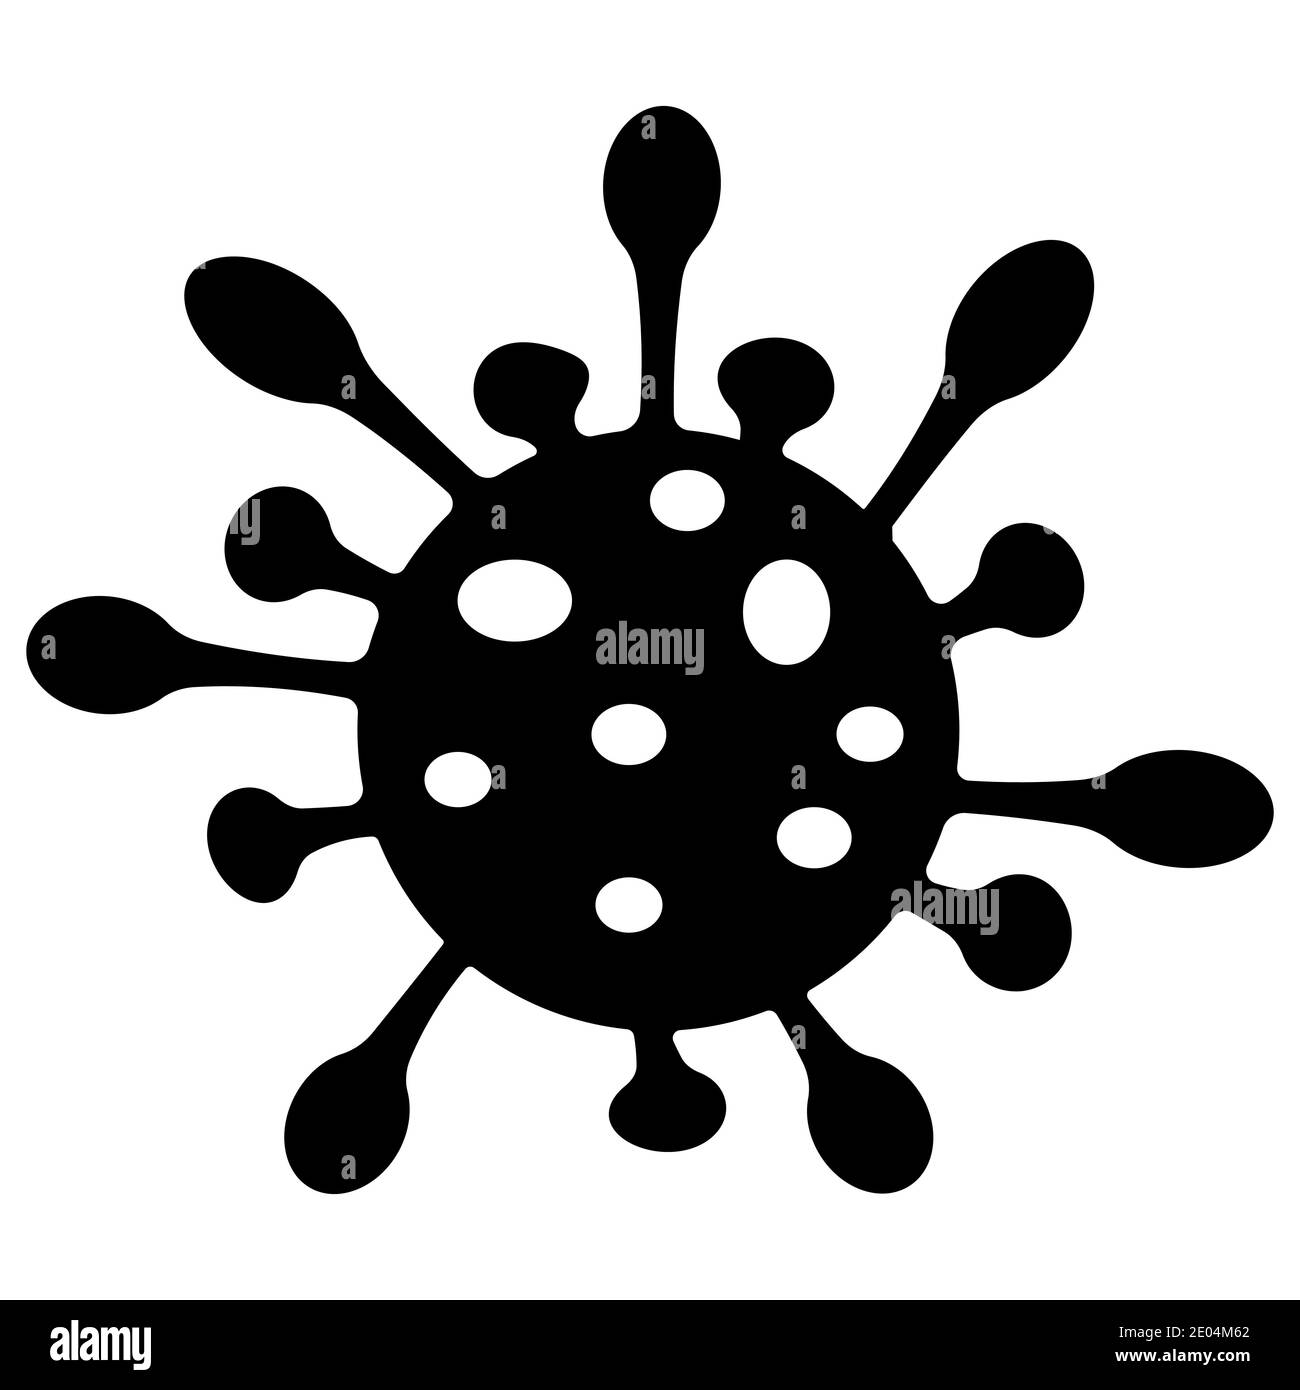 Sign icon bacteria coronavirus influenza pathogen isolated on a white background, vector of bacteria and microbes, microorganisms that cause diseases Stock Vector